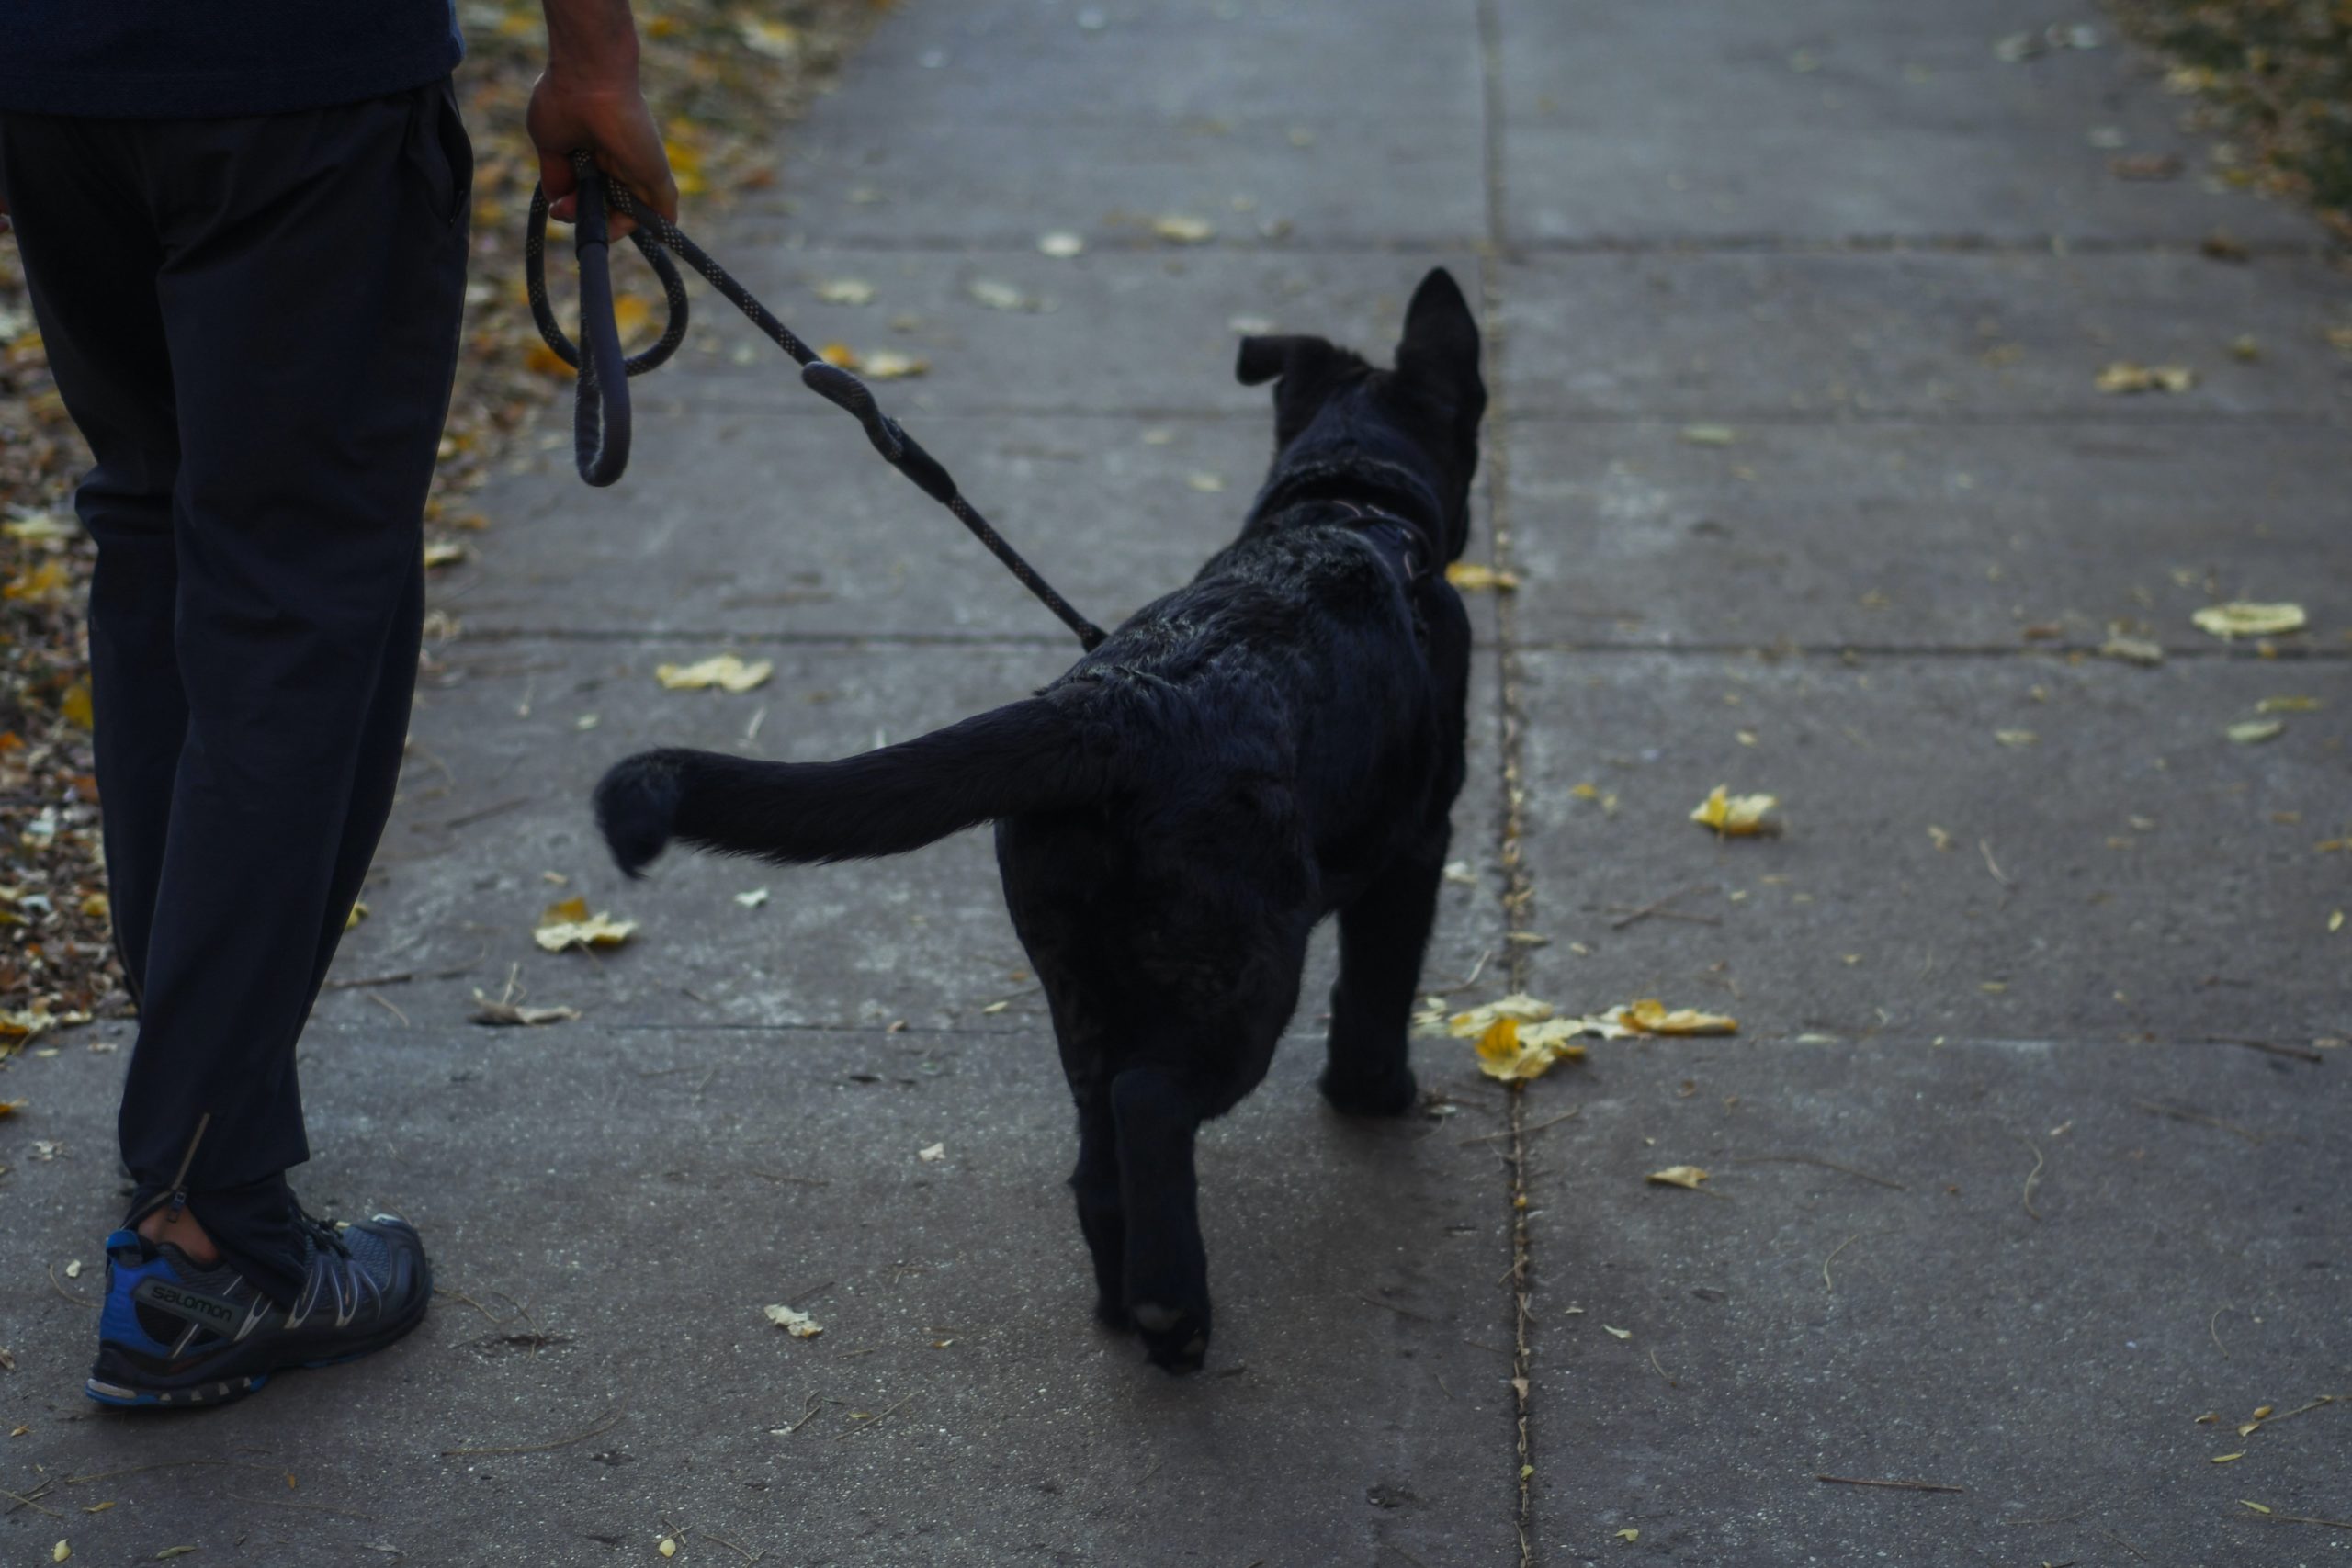 A person walking a dog on a leash representing dog bit incidents